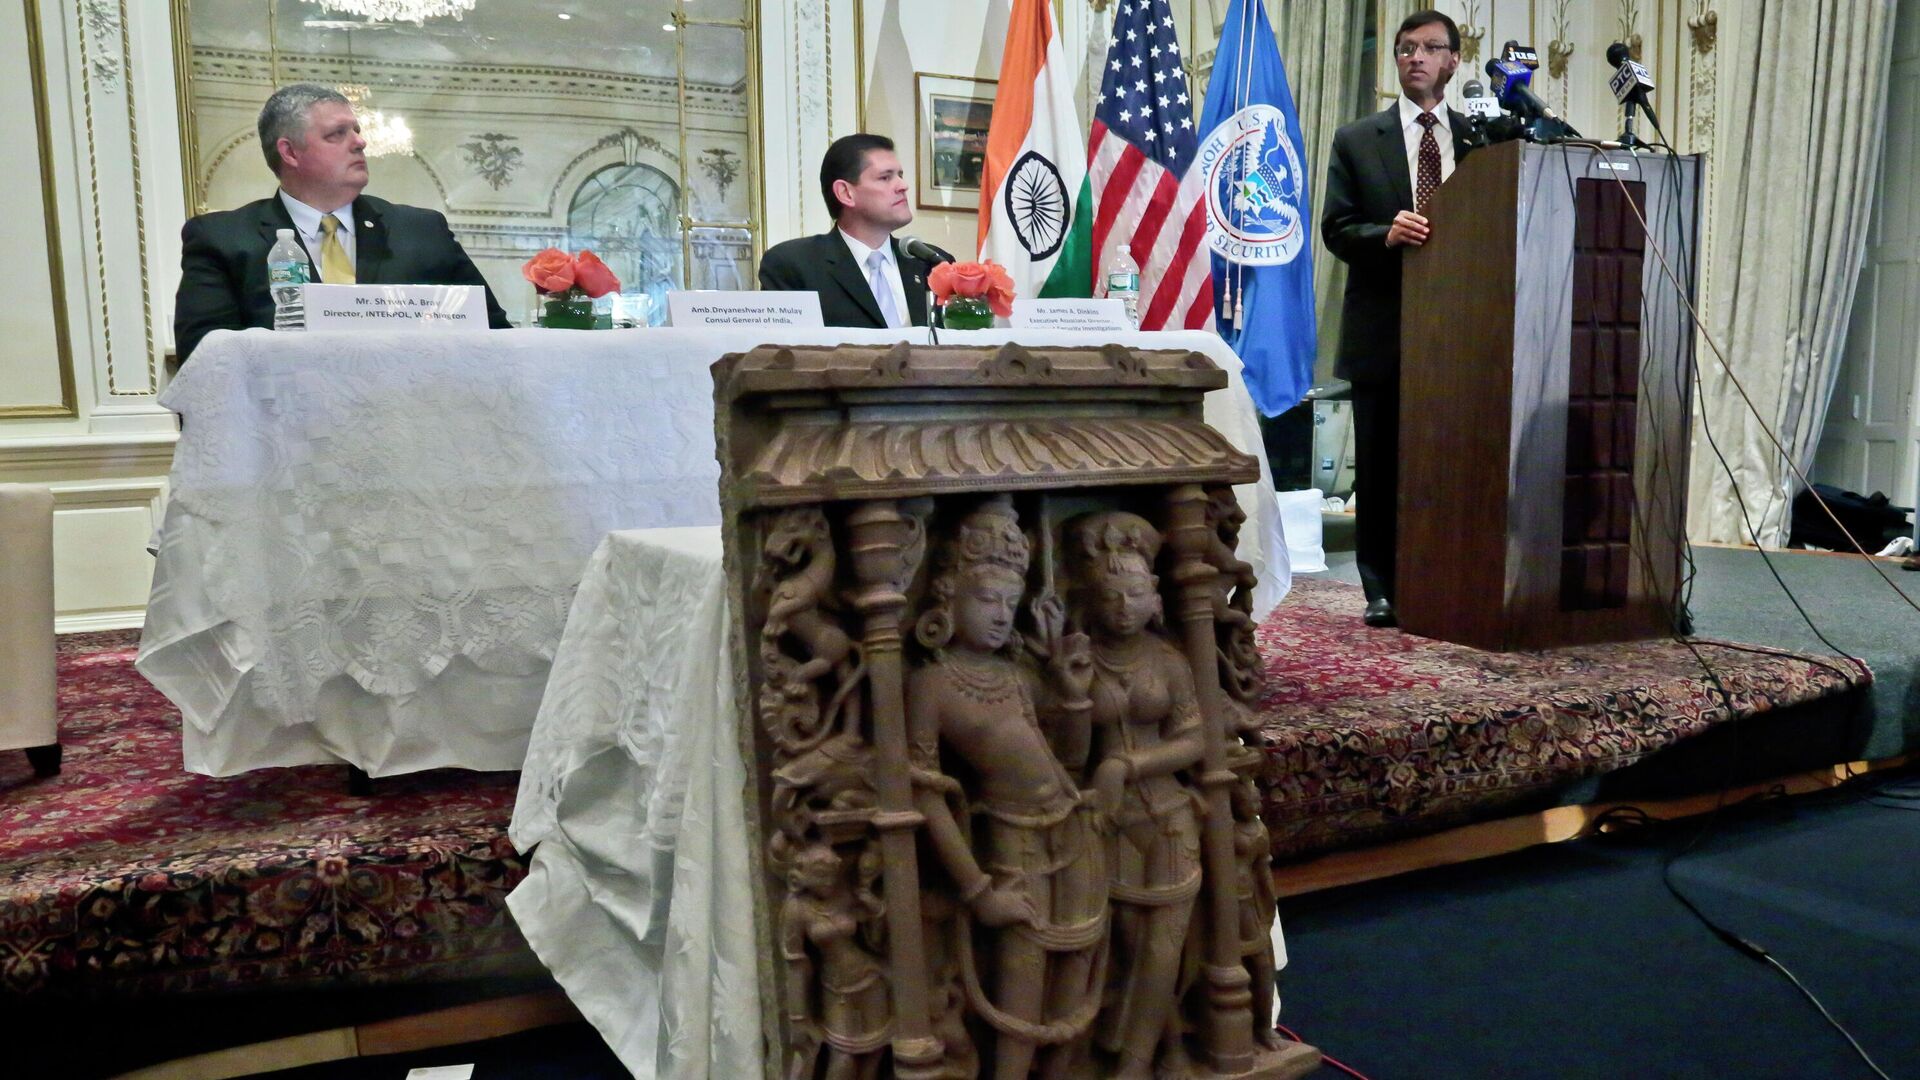  U.S. authorities returned three stolen antiquities, including one of two sandstone sculptures, center, to the Indian government. (File)  - Sputnik International, 1920, 12.10.2021